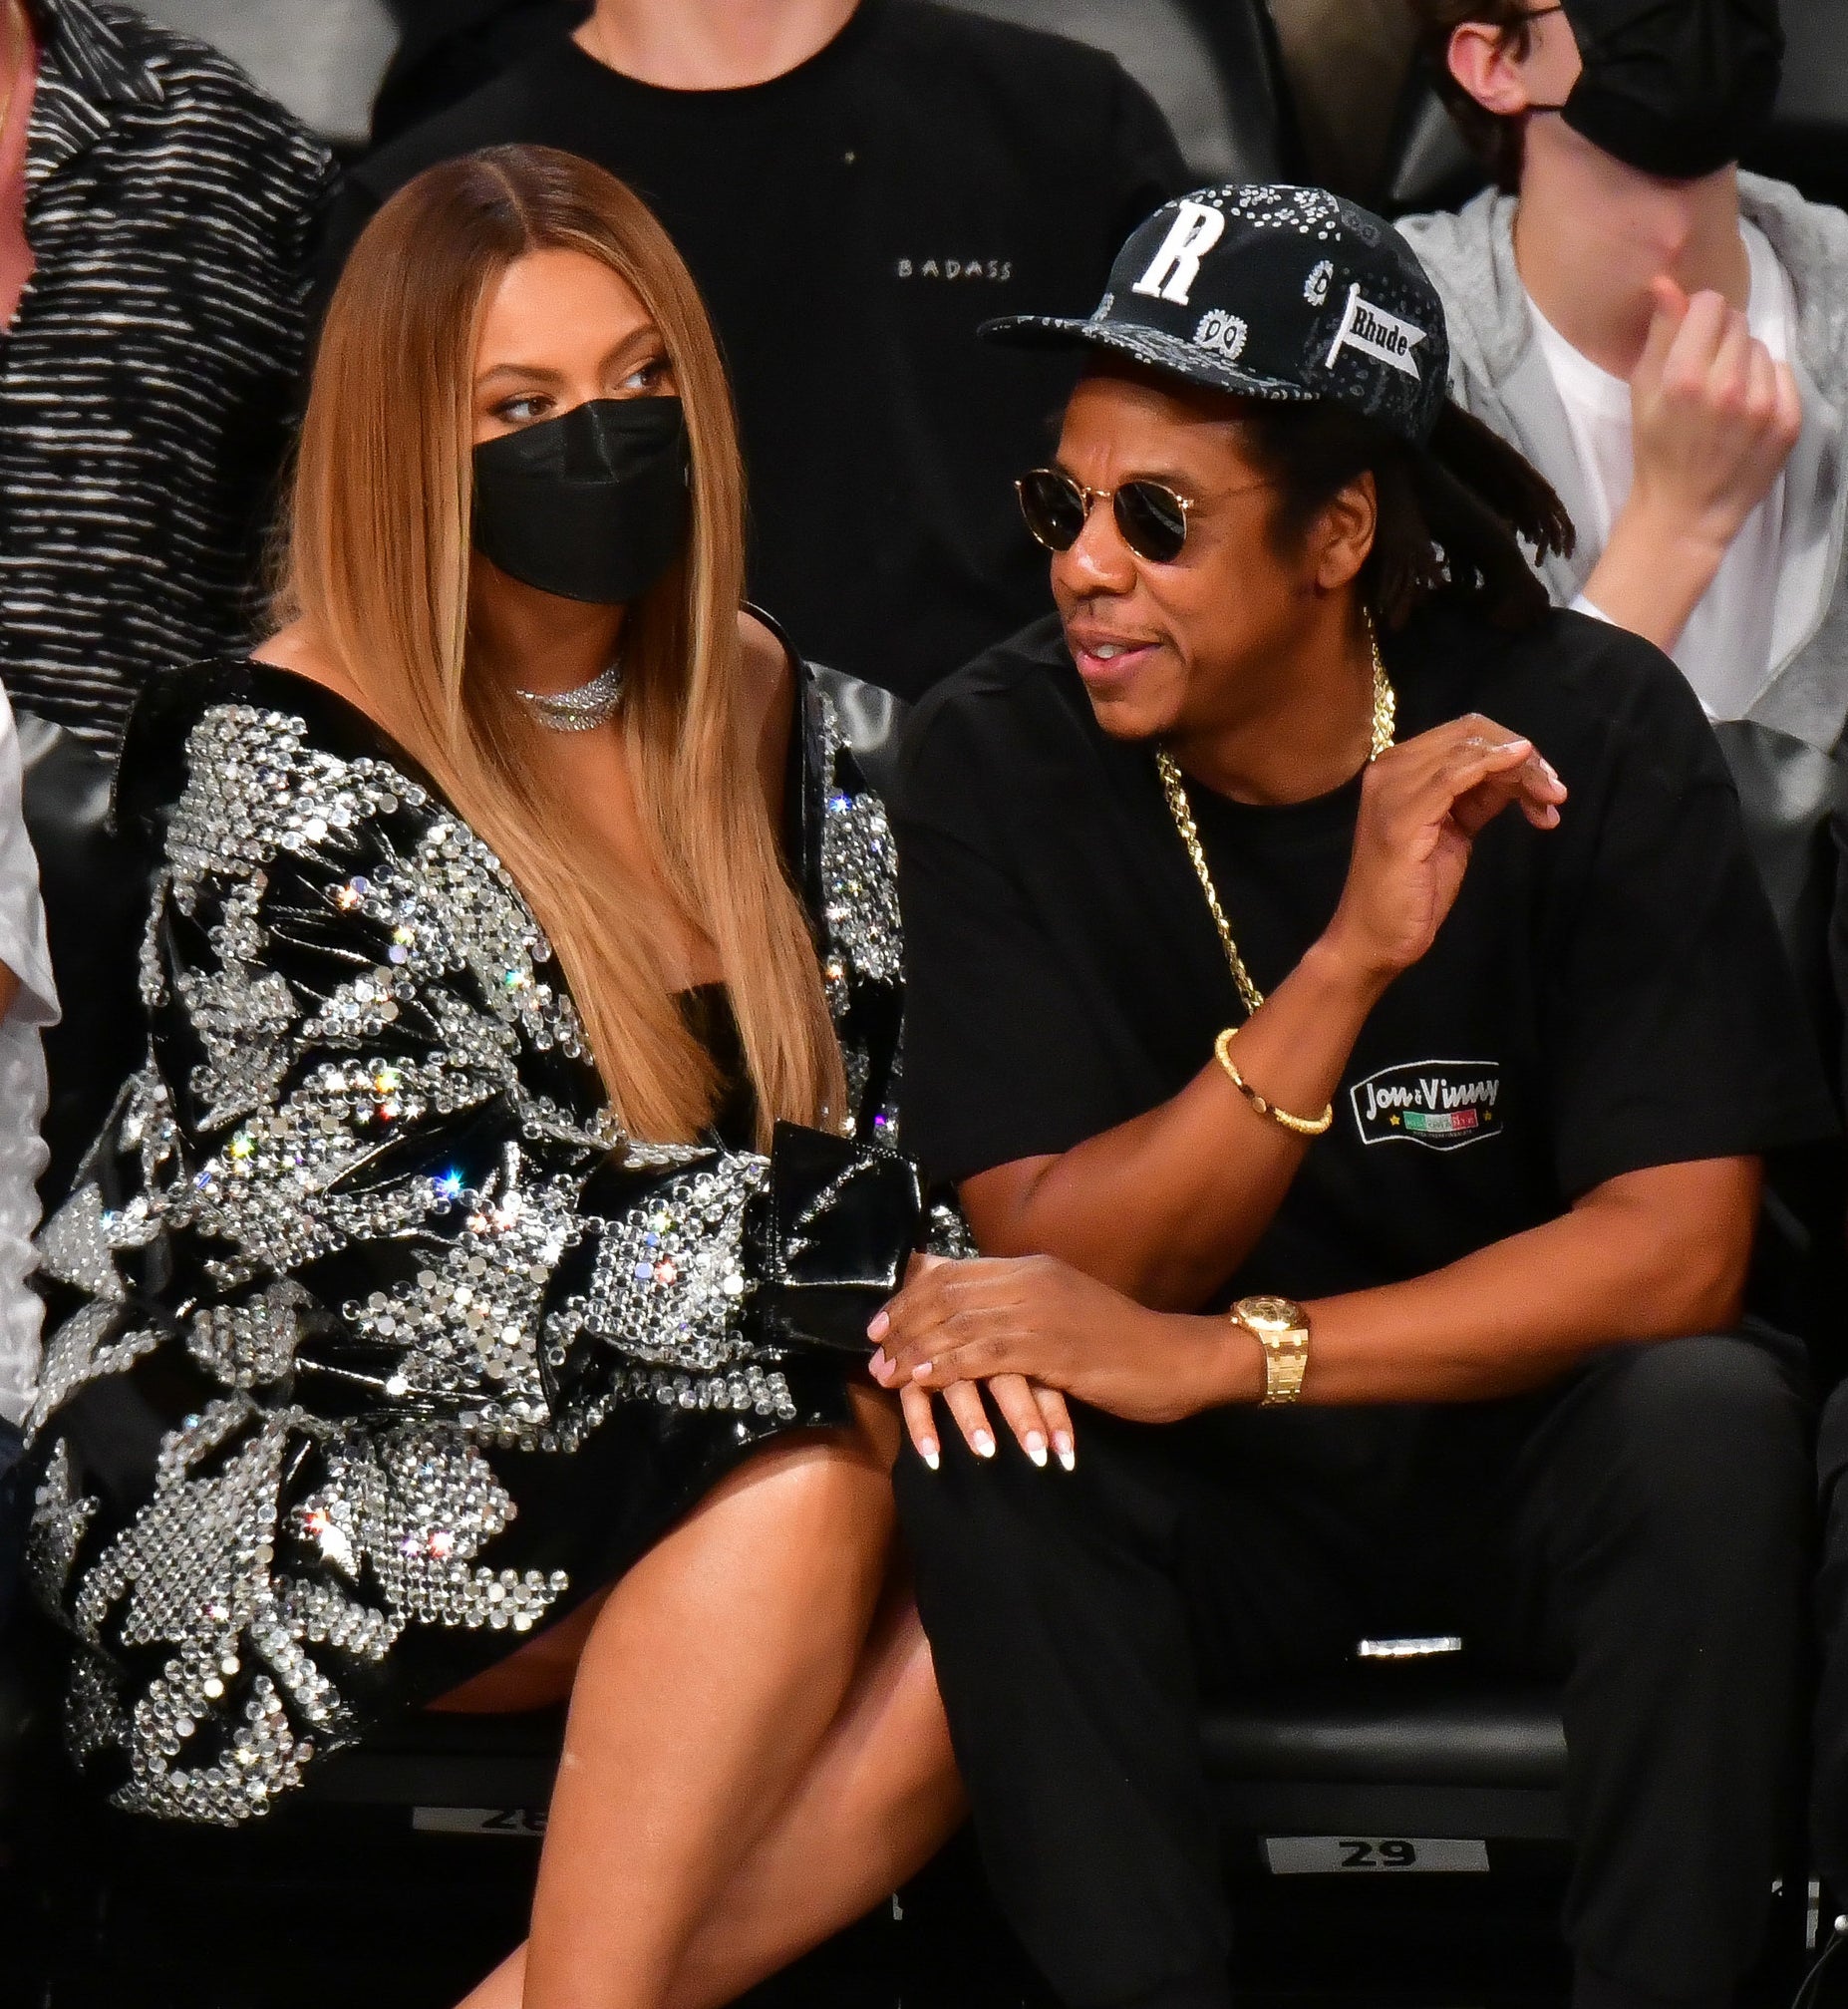 Beyonce and Jay-Z at a sports game